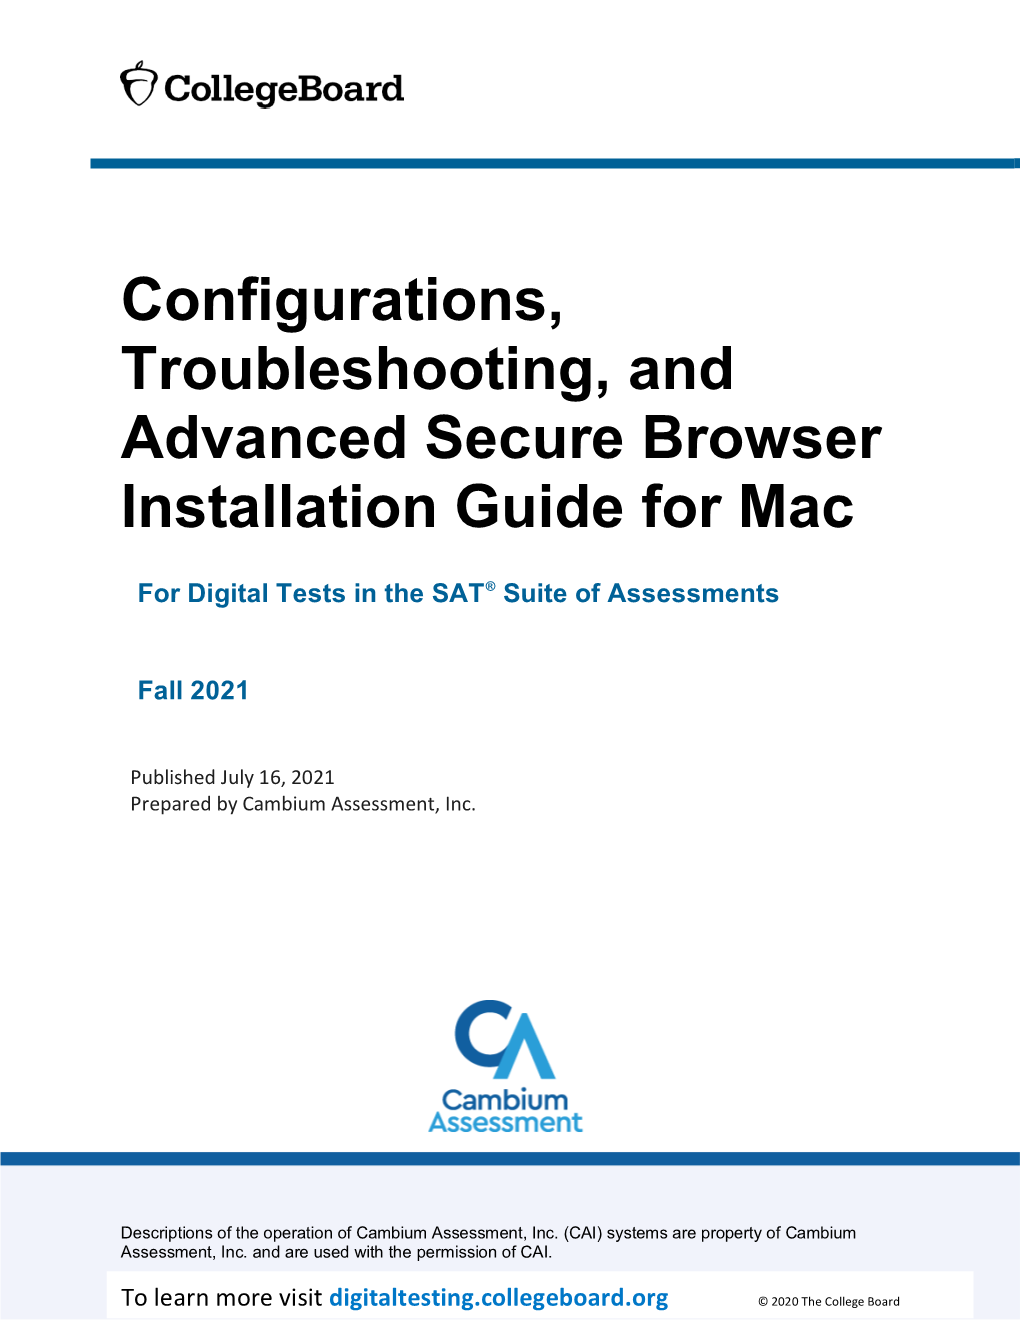 Configurations, Troubleshooting, and Advanced Secure Browser Installation Guide for Mac